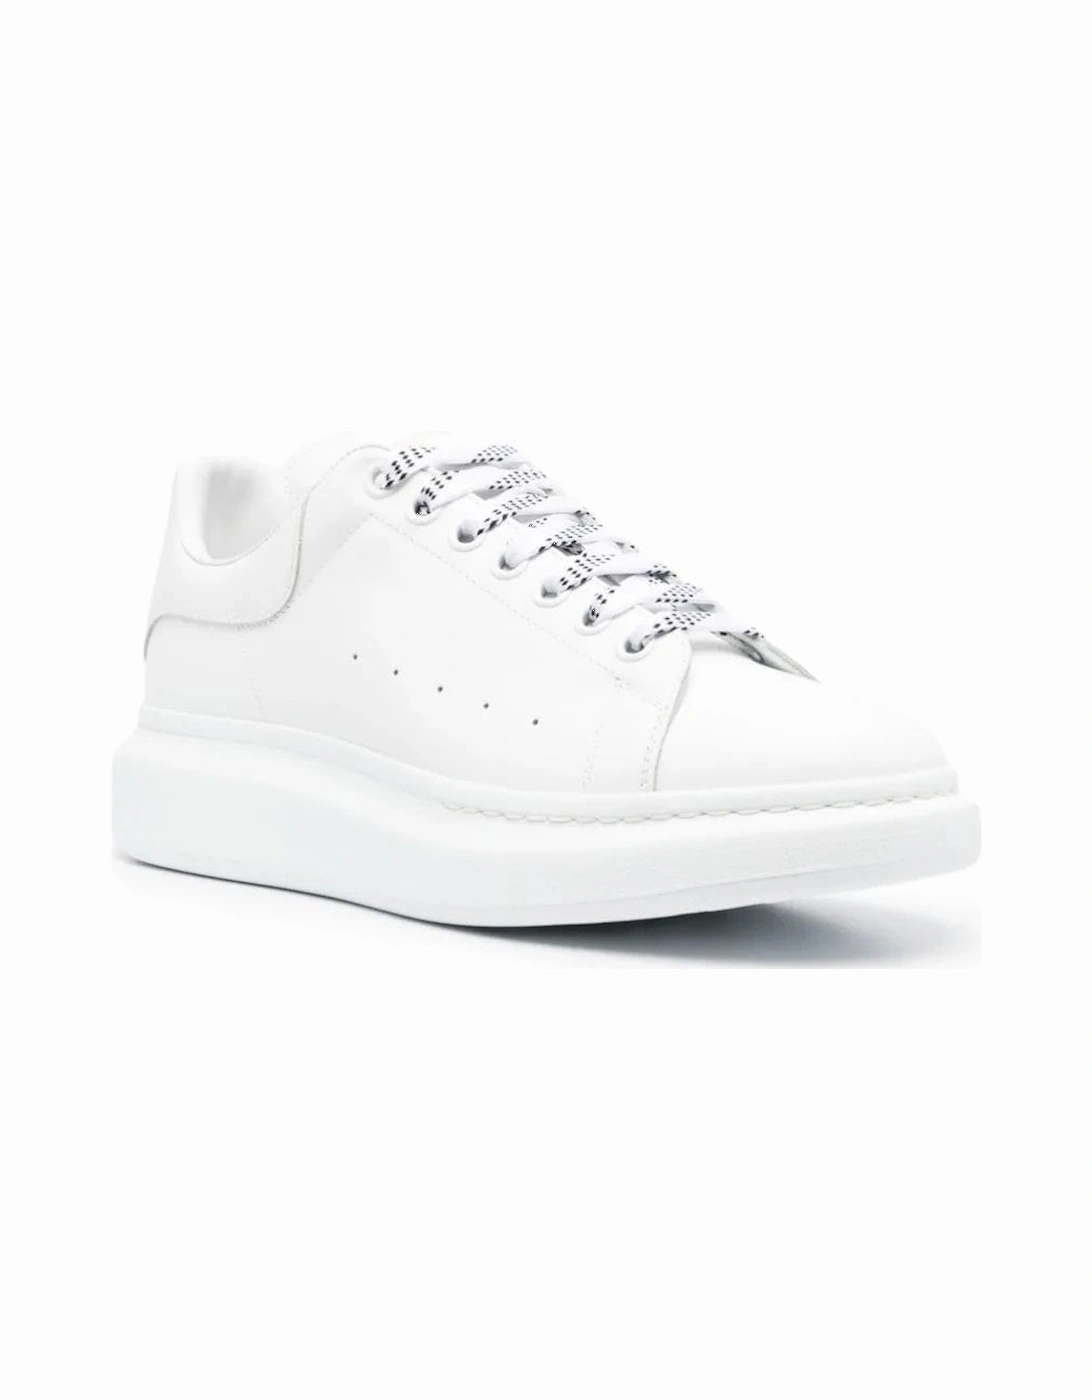 Oversize Sole All White Sneakers